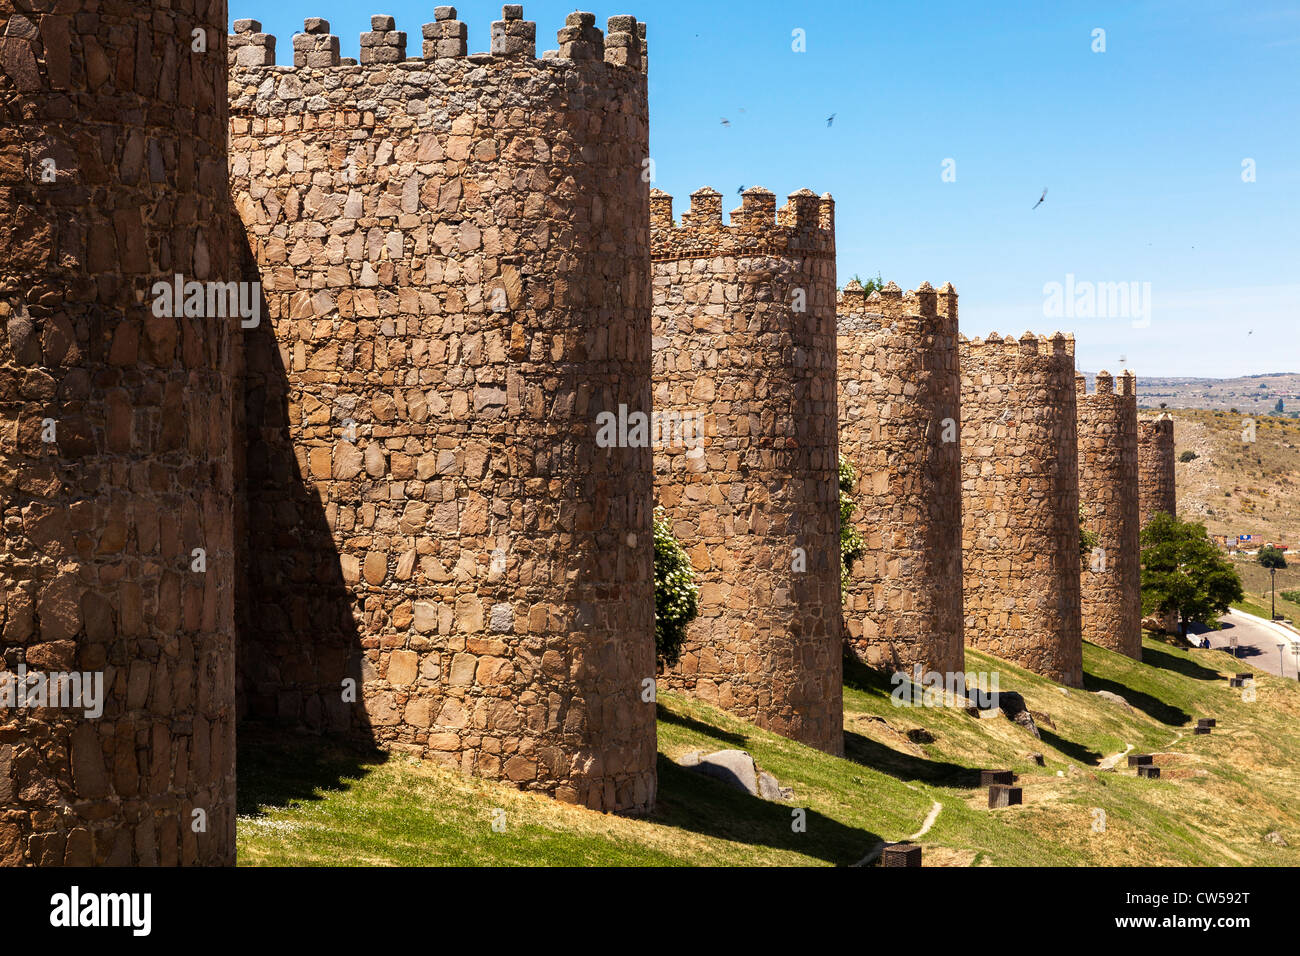 The fortification of the medieval city walls of Avila under a clear blue sky, Castile and León, Spain, Europe. Stock Photo